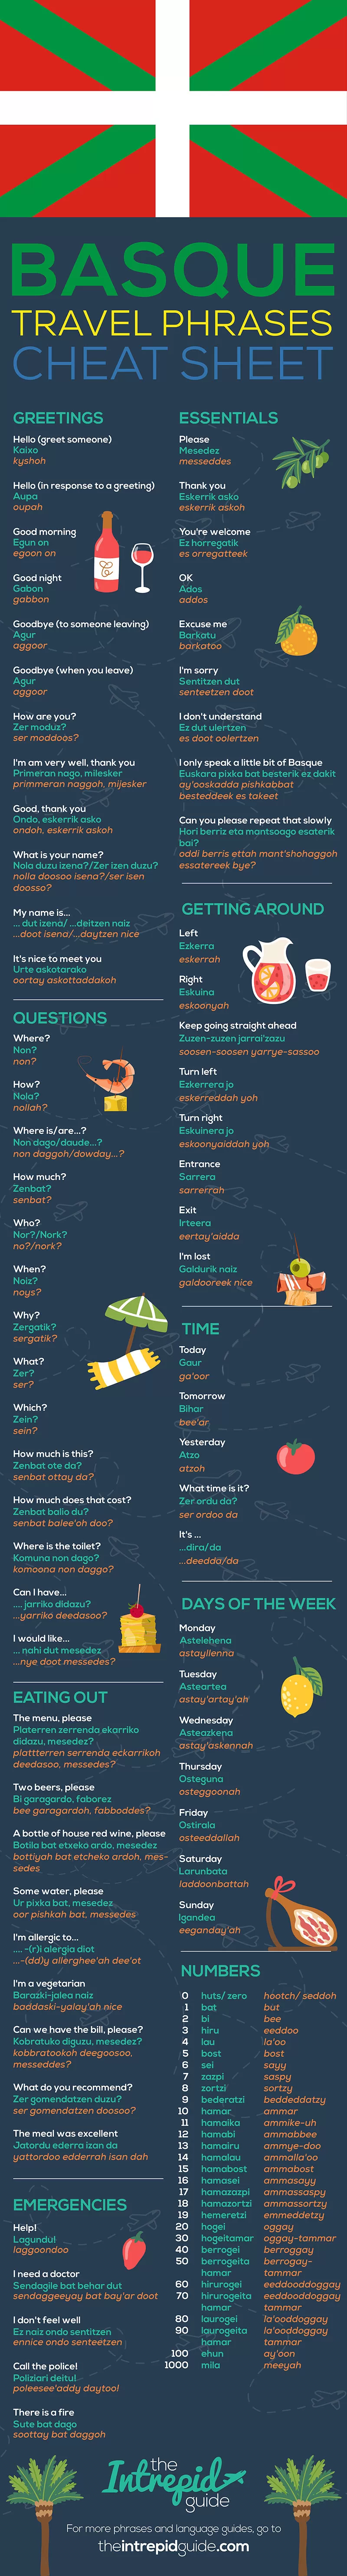 Basque Travel Phrases - Useful Basque Phrases and Words for Travellers